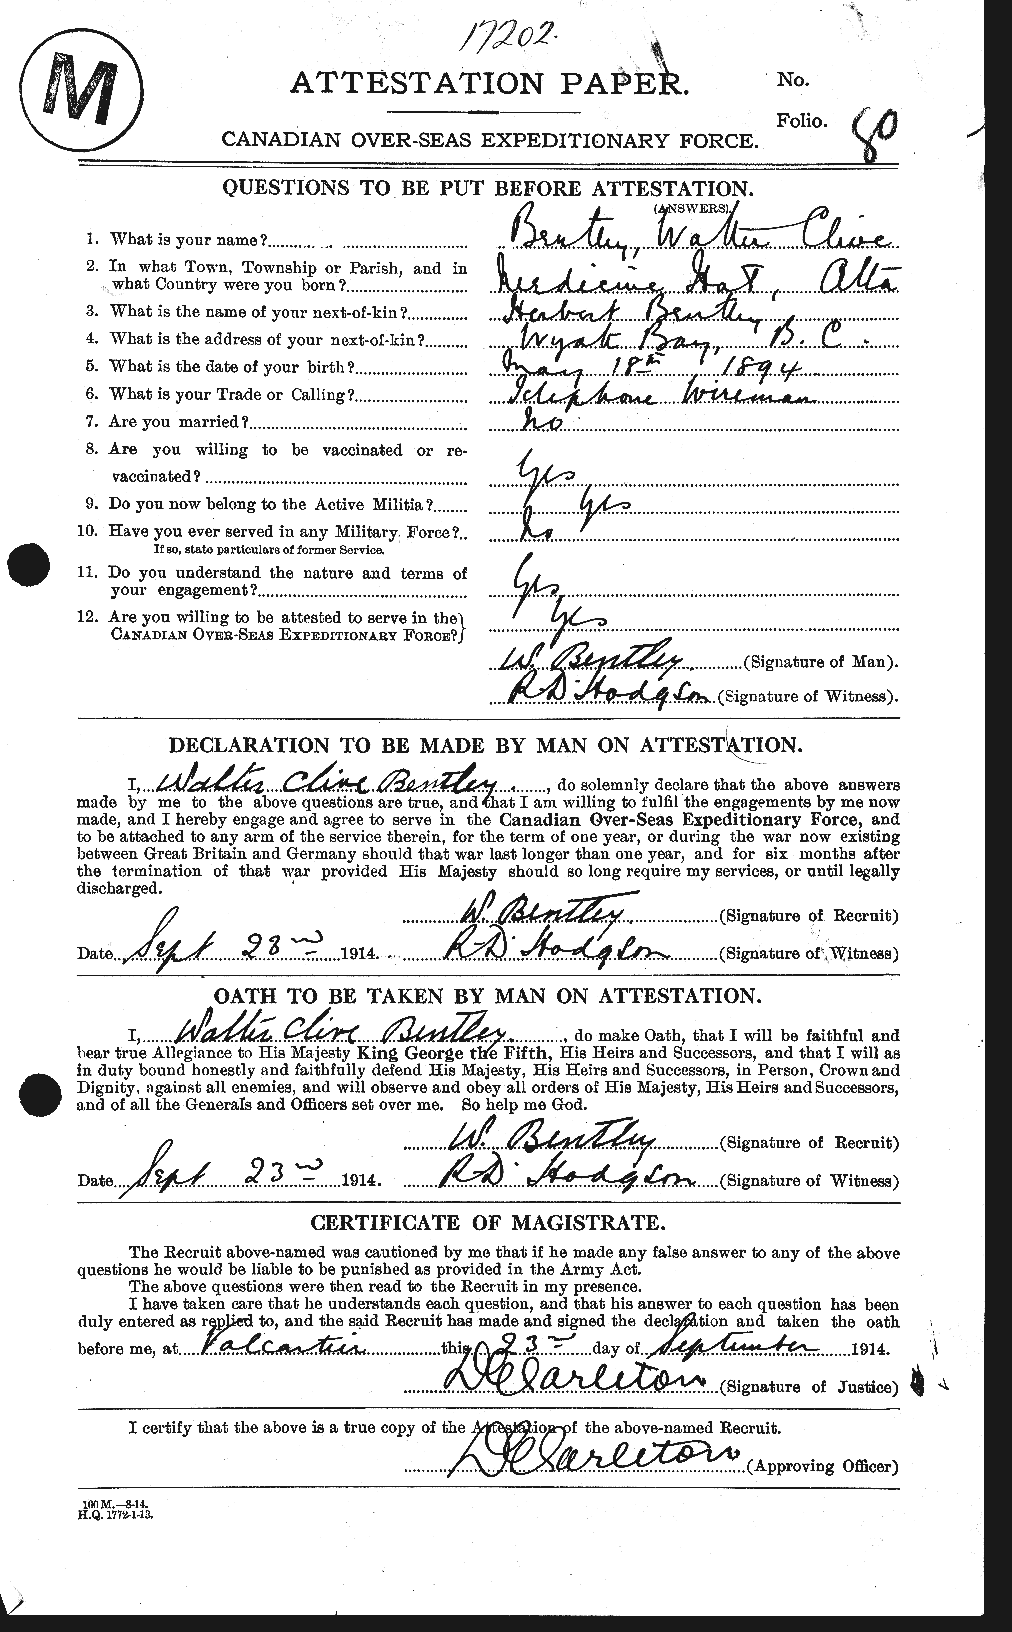 Personnel Records of the First World War - CEF 237842a